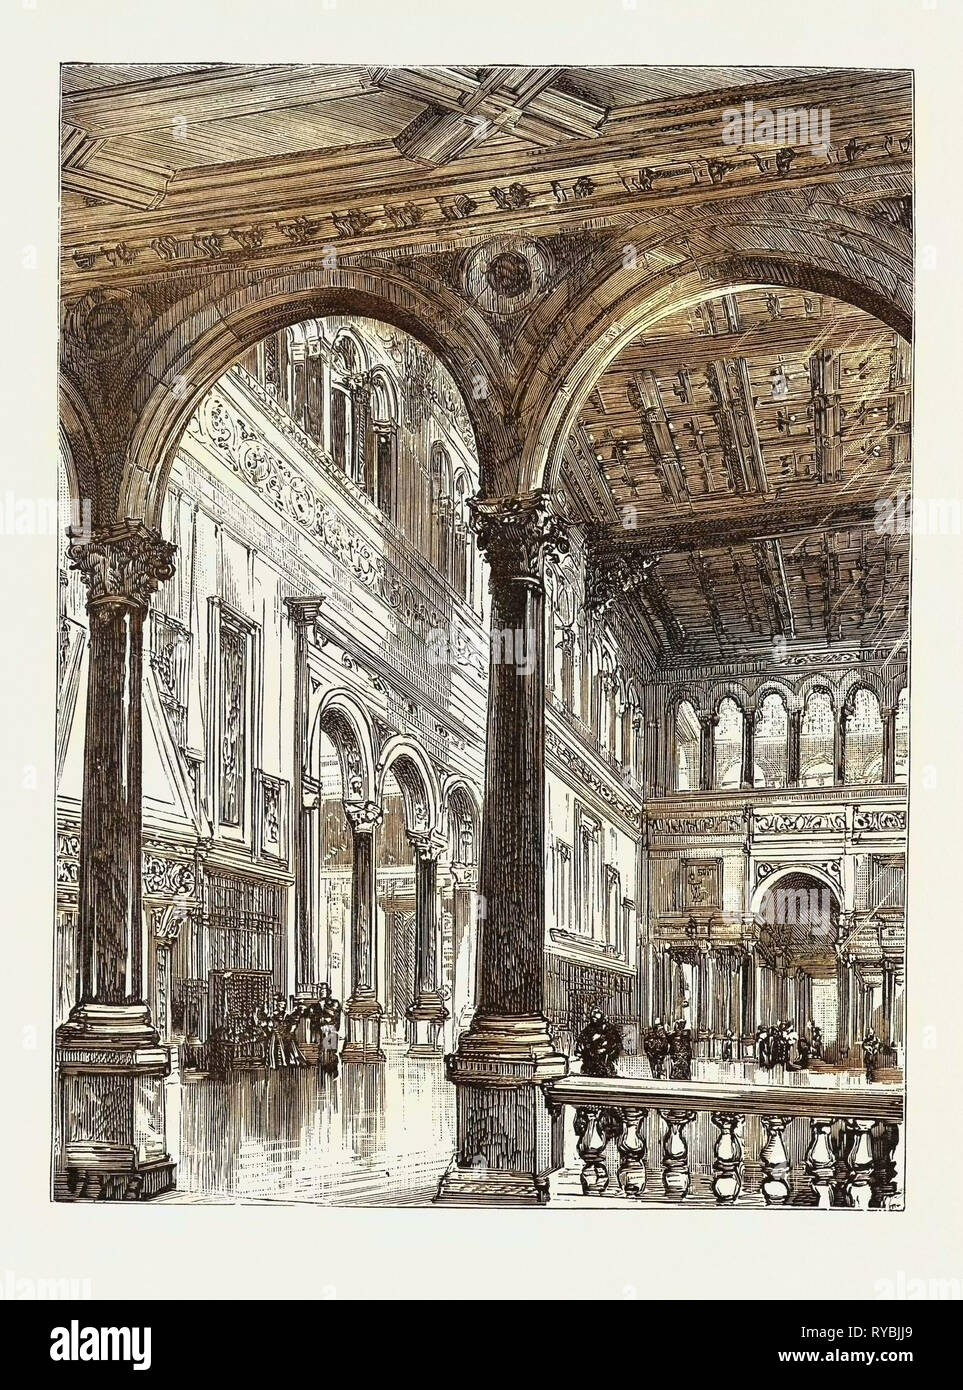 Lord Salisbury's Visit to Birmingham, Hewell Grange, the Seat of Lord Windsor, Where the Prime Minister is Staying: The Great Hall Stock Photo